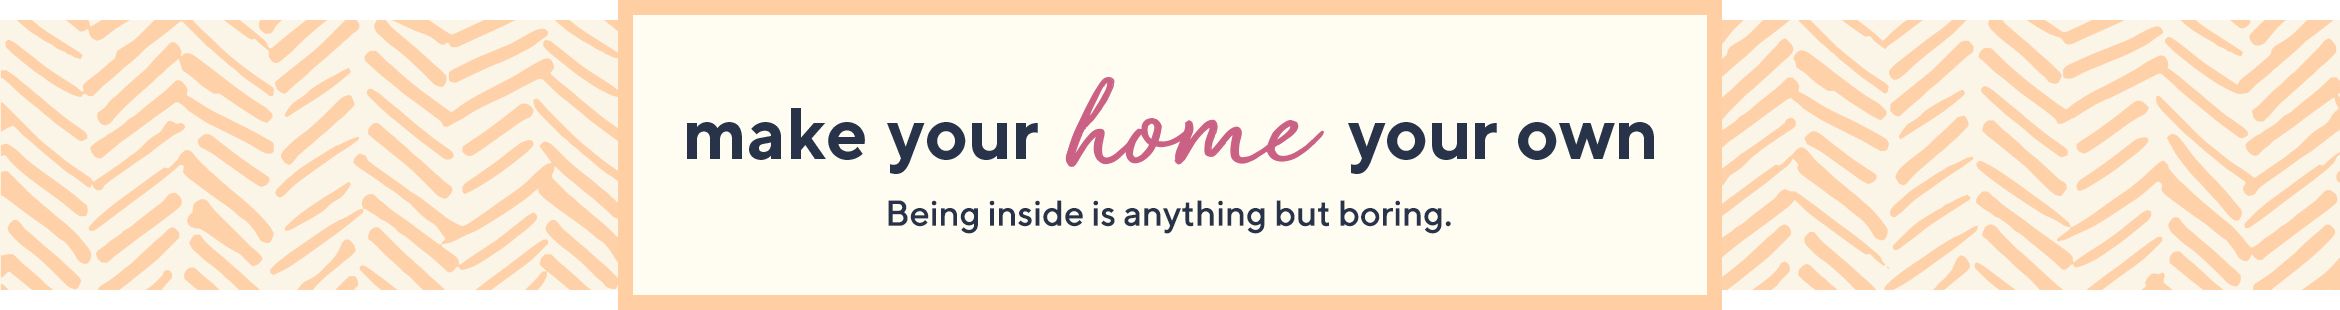 Make Your Home Your Own.  Being inside is anything but boring.